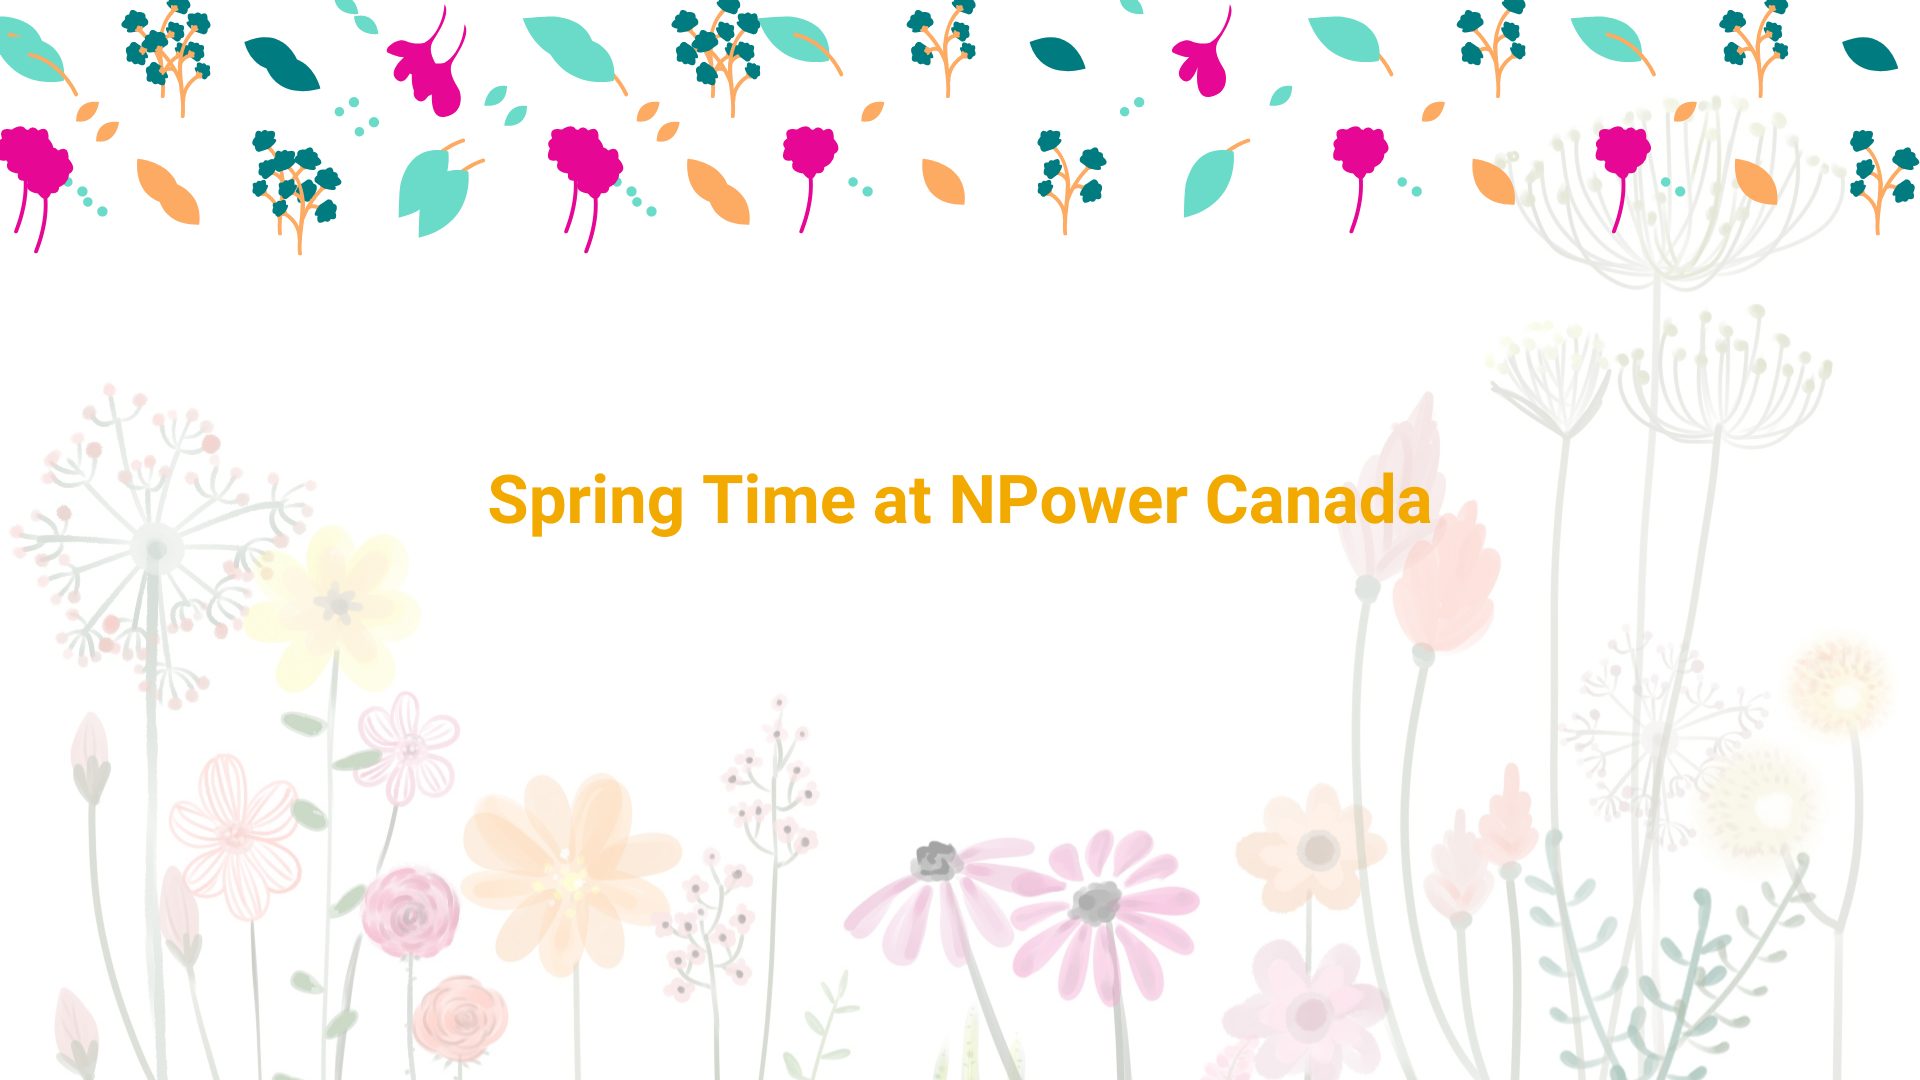 Spring Time at NPower Canada text in orange font with multicolored flower background illustration